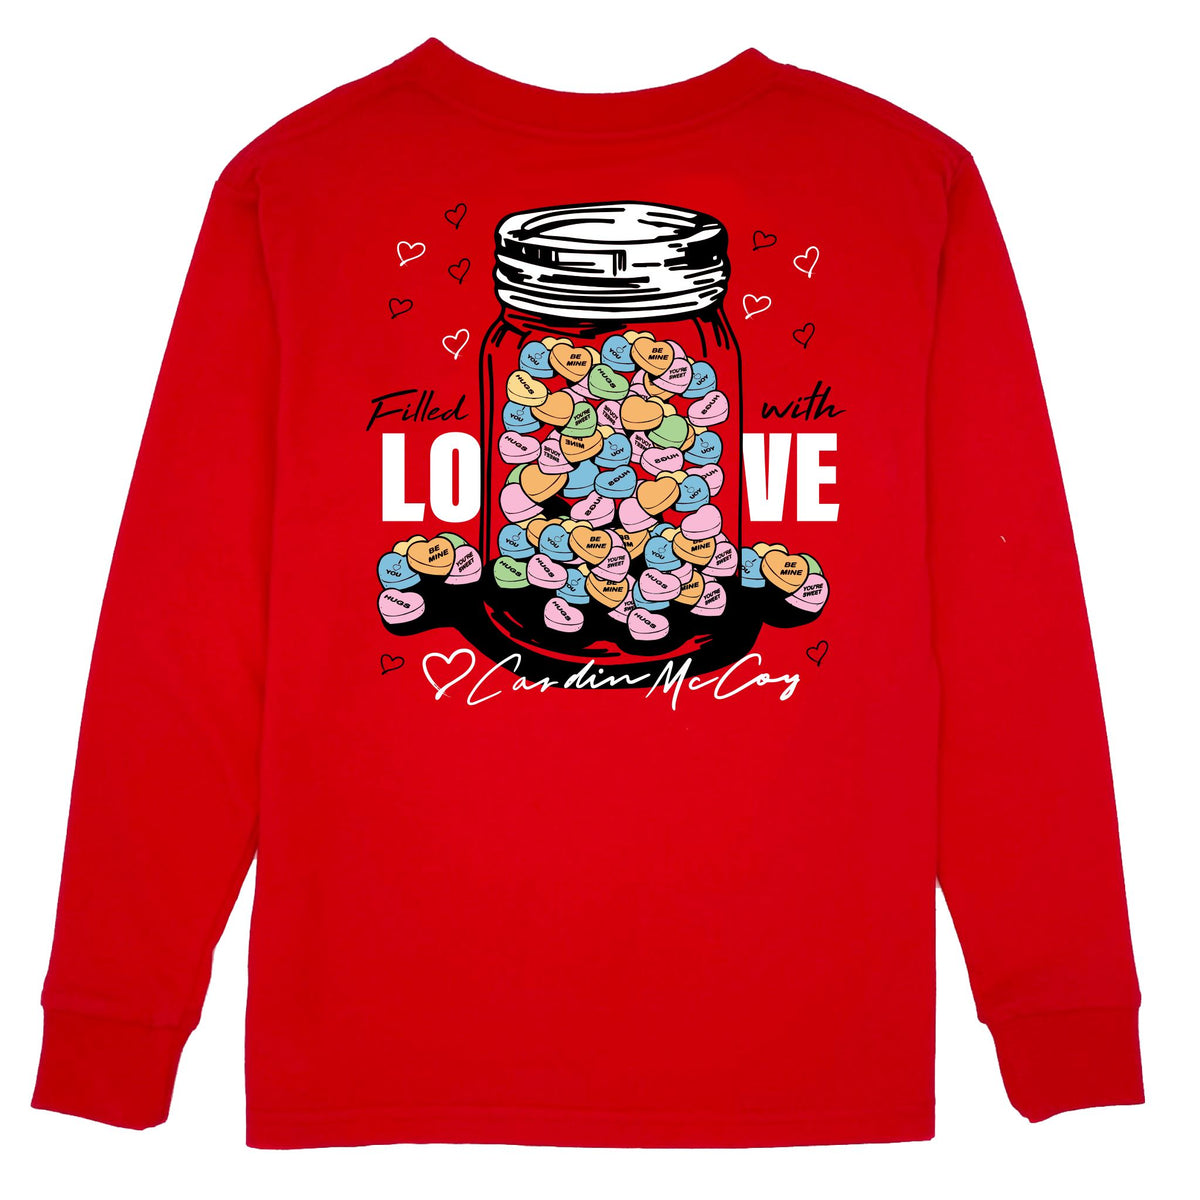 Kids' Filled With Love Long Sleeve Pocket Tee Long Sleeve T-Shirt Cardin McCoy Red S (6/7) 